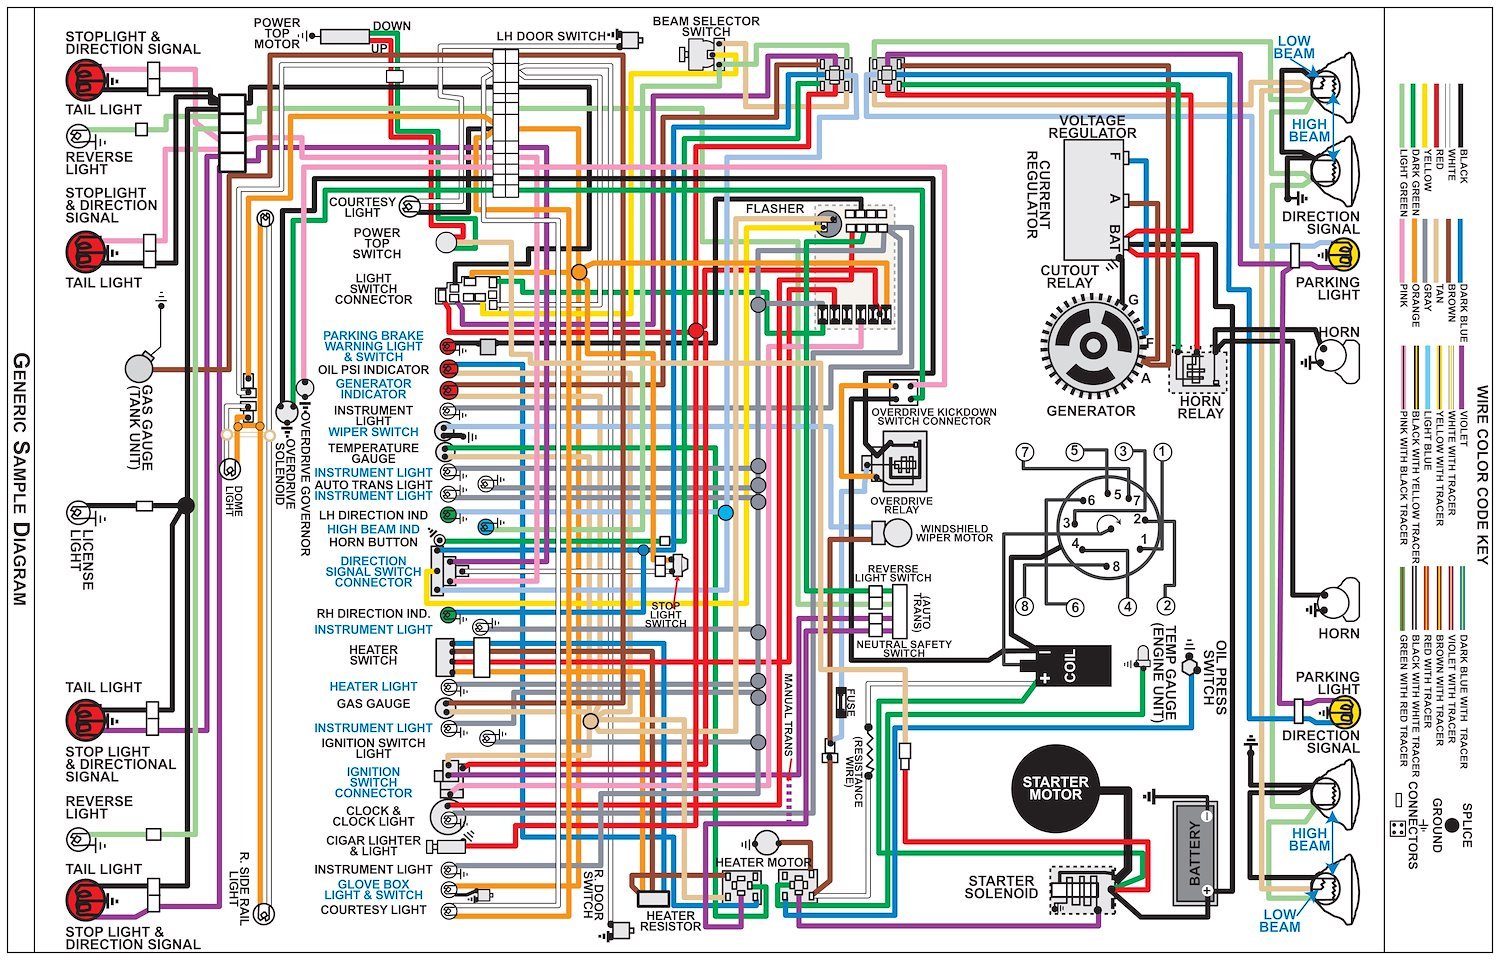 Wiring Diagram for 1966 Ford Galaxie, 11 in x 17 in., Laminated